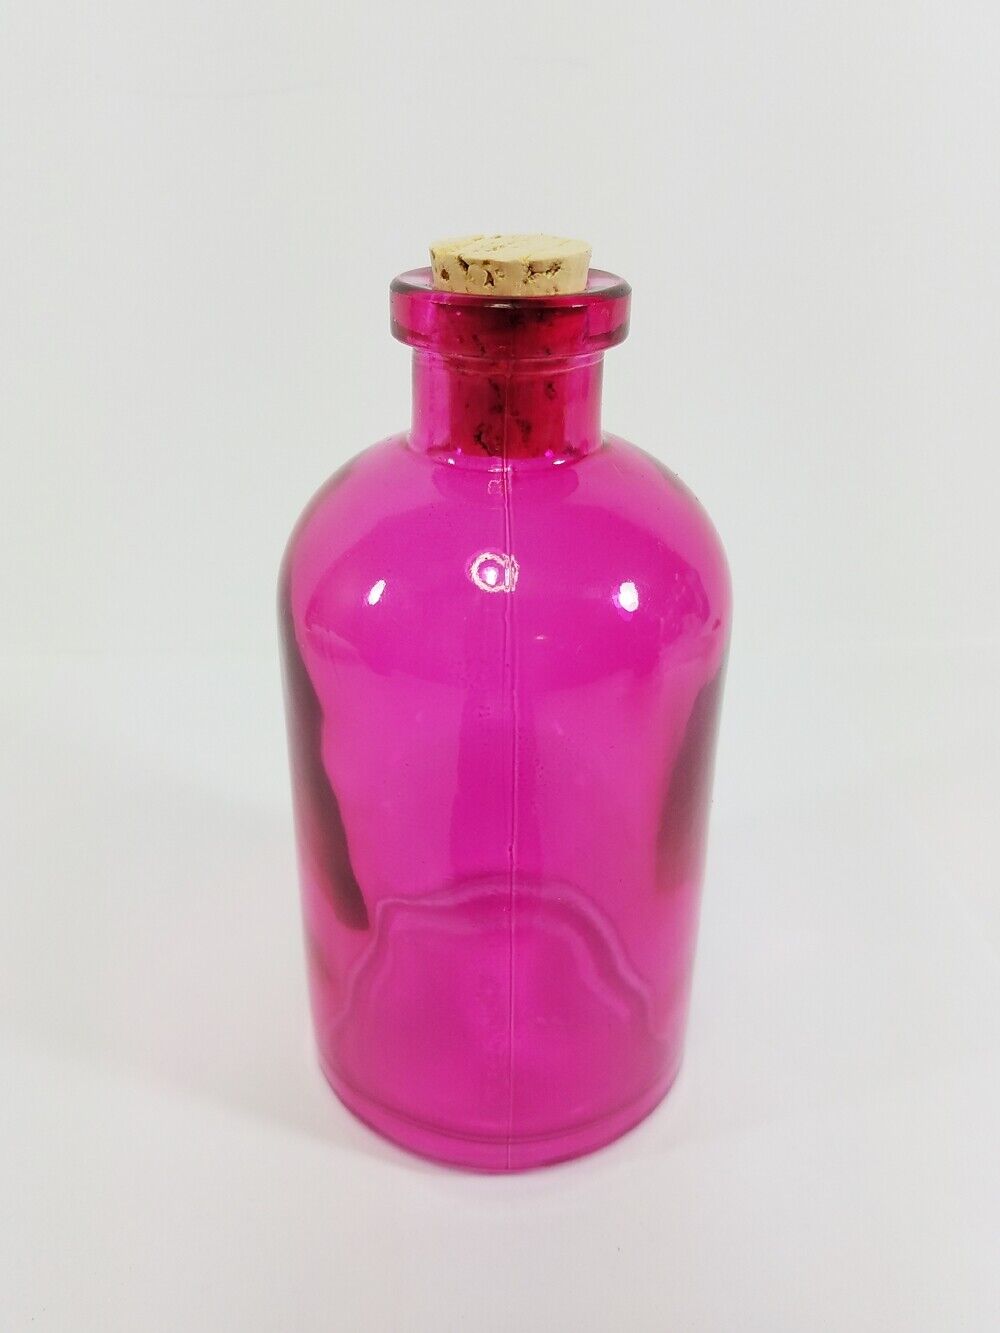 Purple Fuchsia Colored Glass Vintage Style Apothecary Jar Height 5.5 in